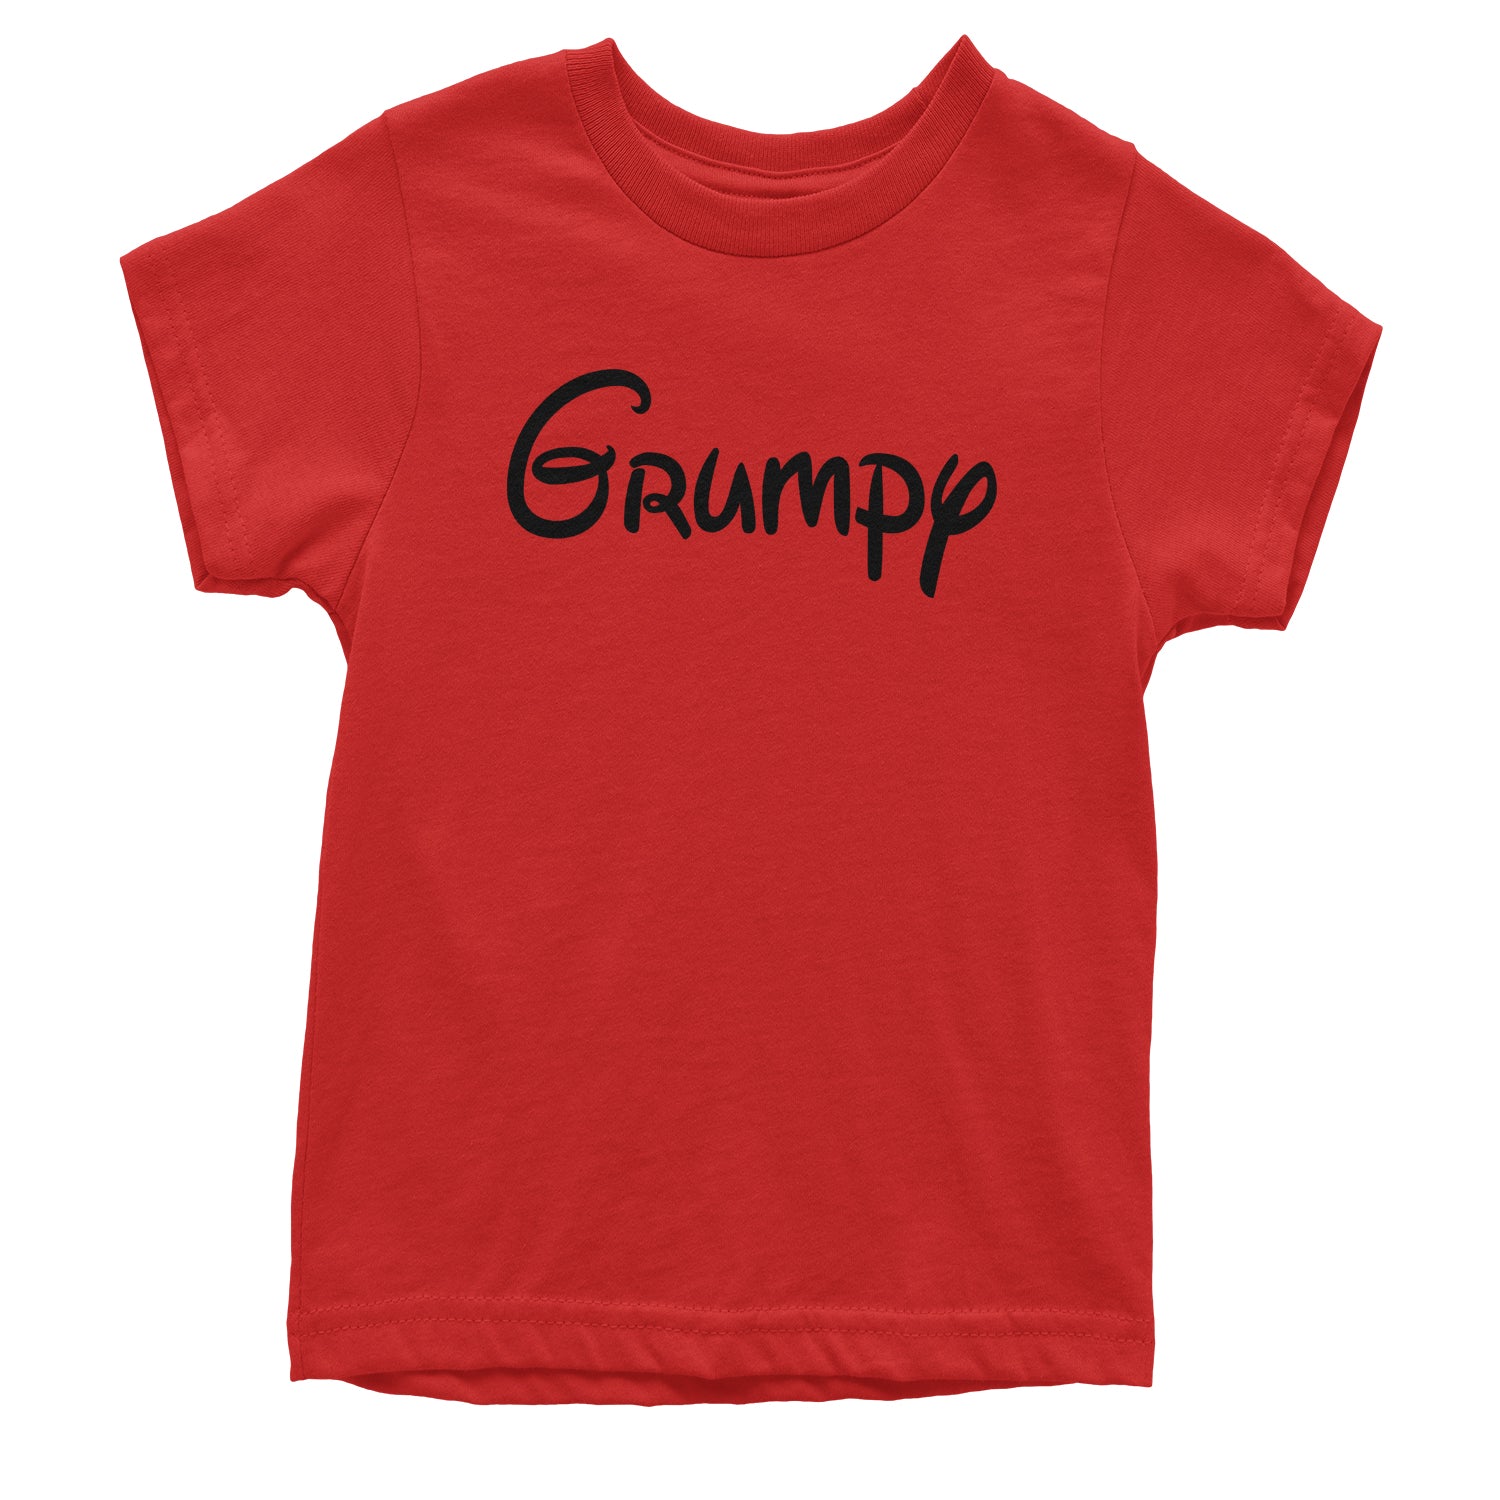 Grumpy - 7 Dwarfs Costume Youth T-shirt and, costume, dwarfs, group, halloween, matching, seven, snow, the, white by Expression Tees